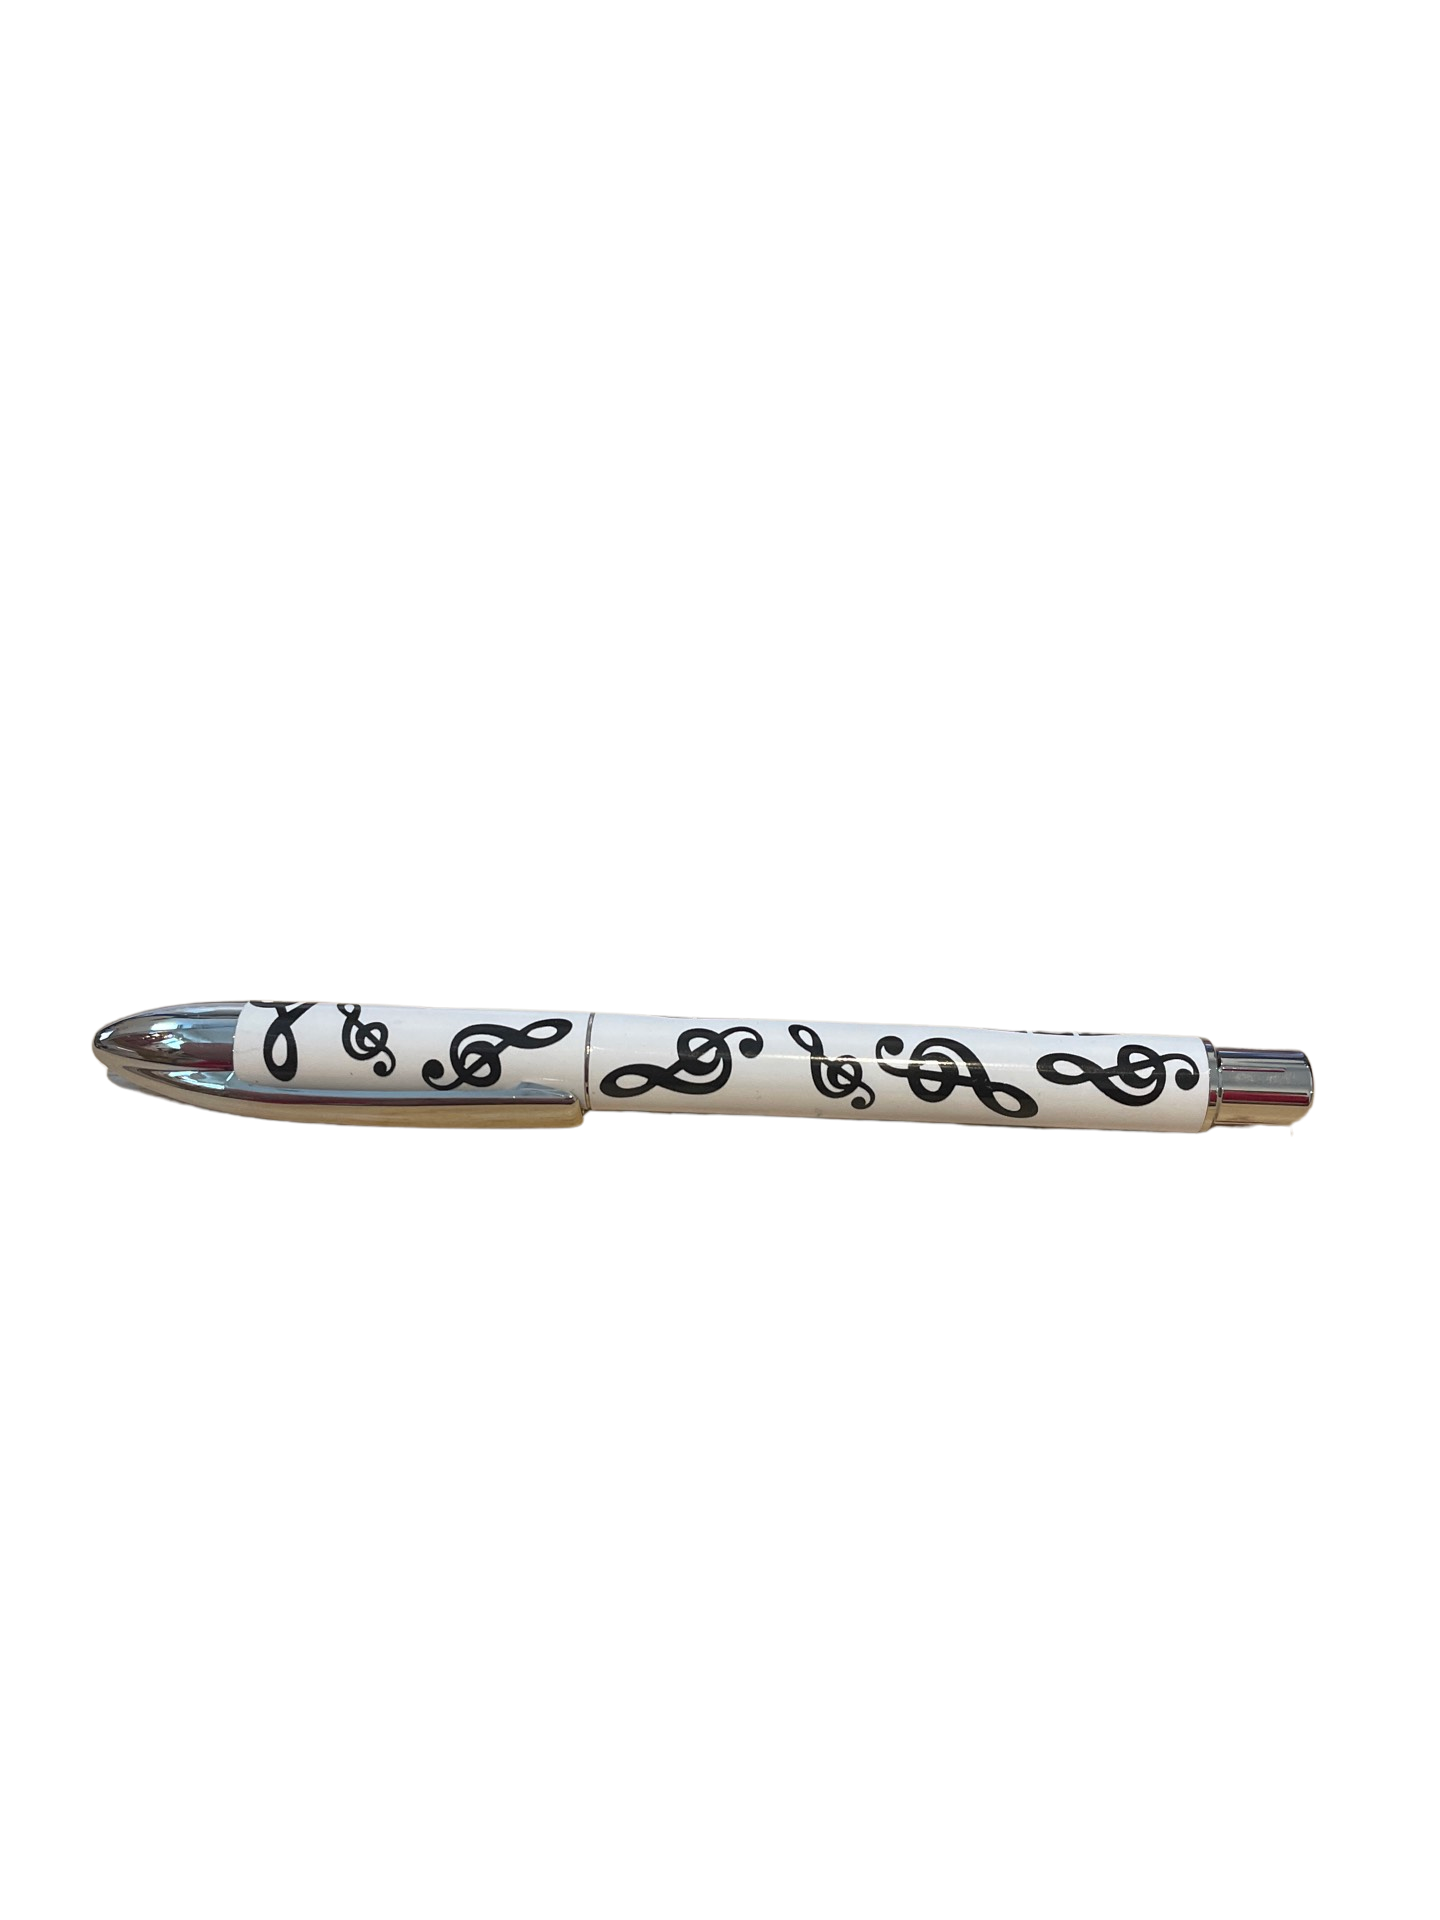 Designer Pen White with Black Treble Clefs and a Black Keyboard